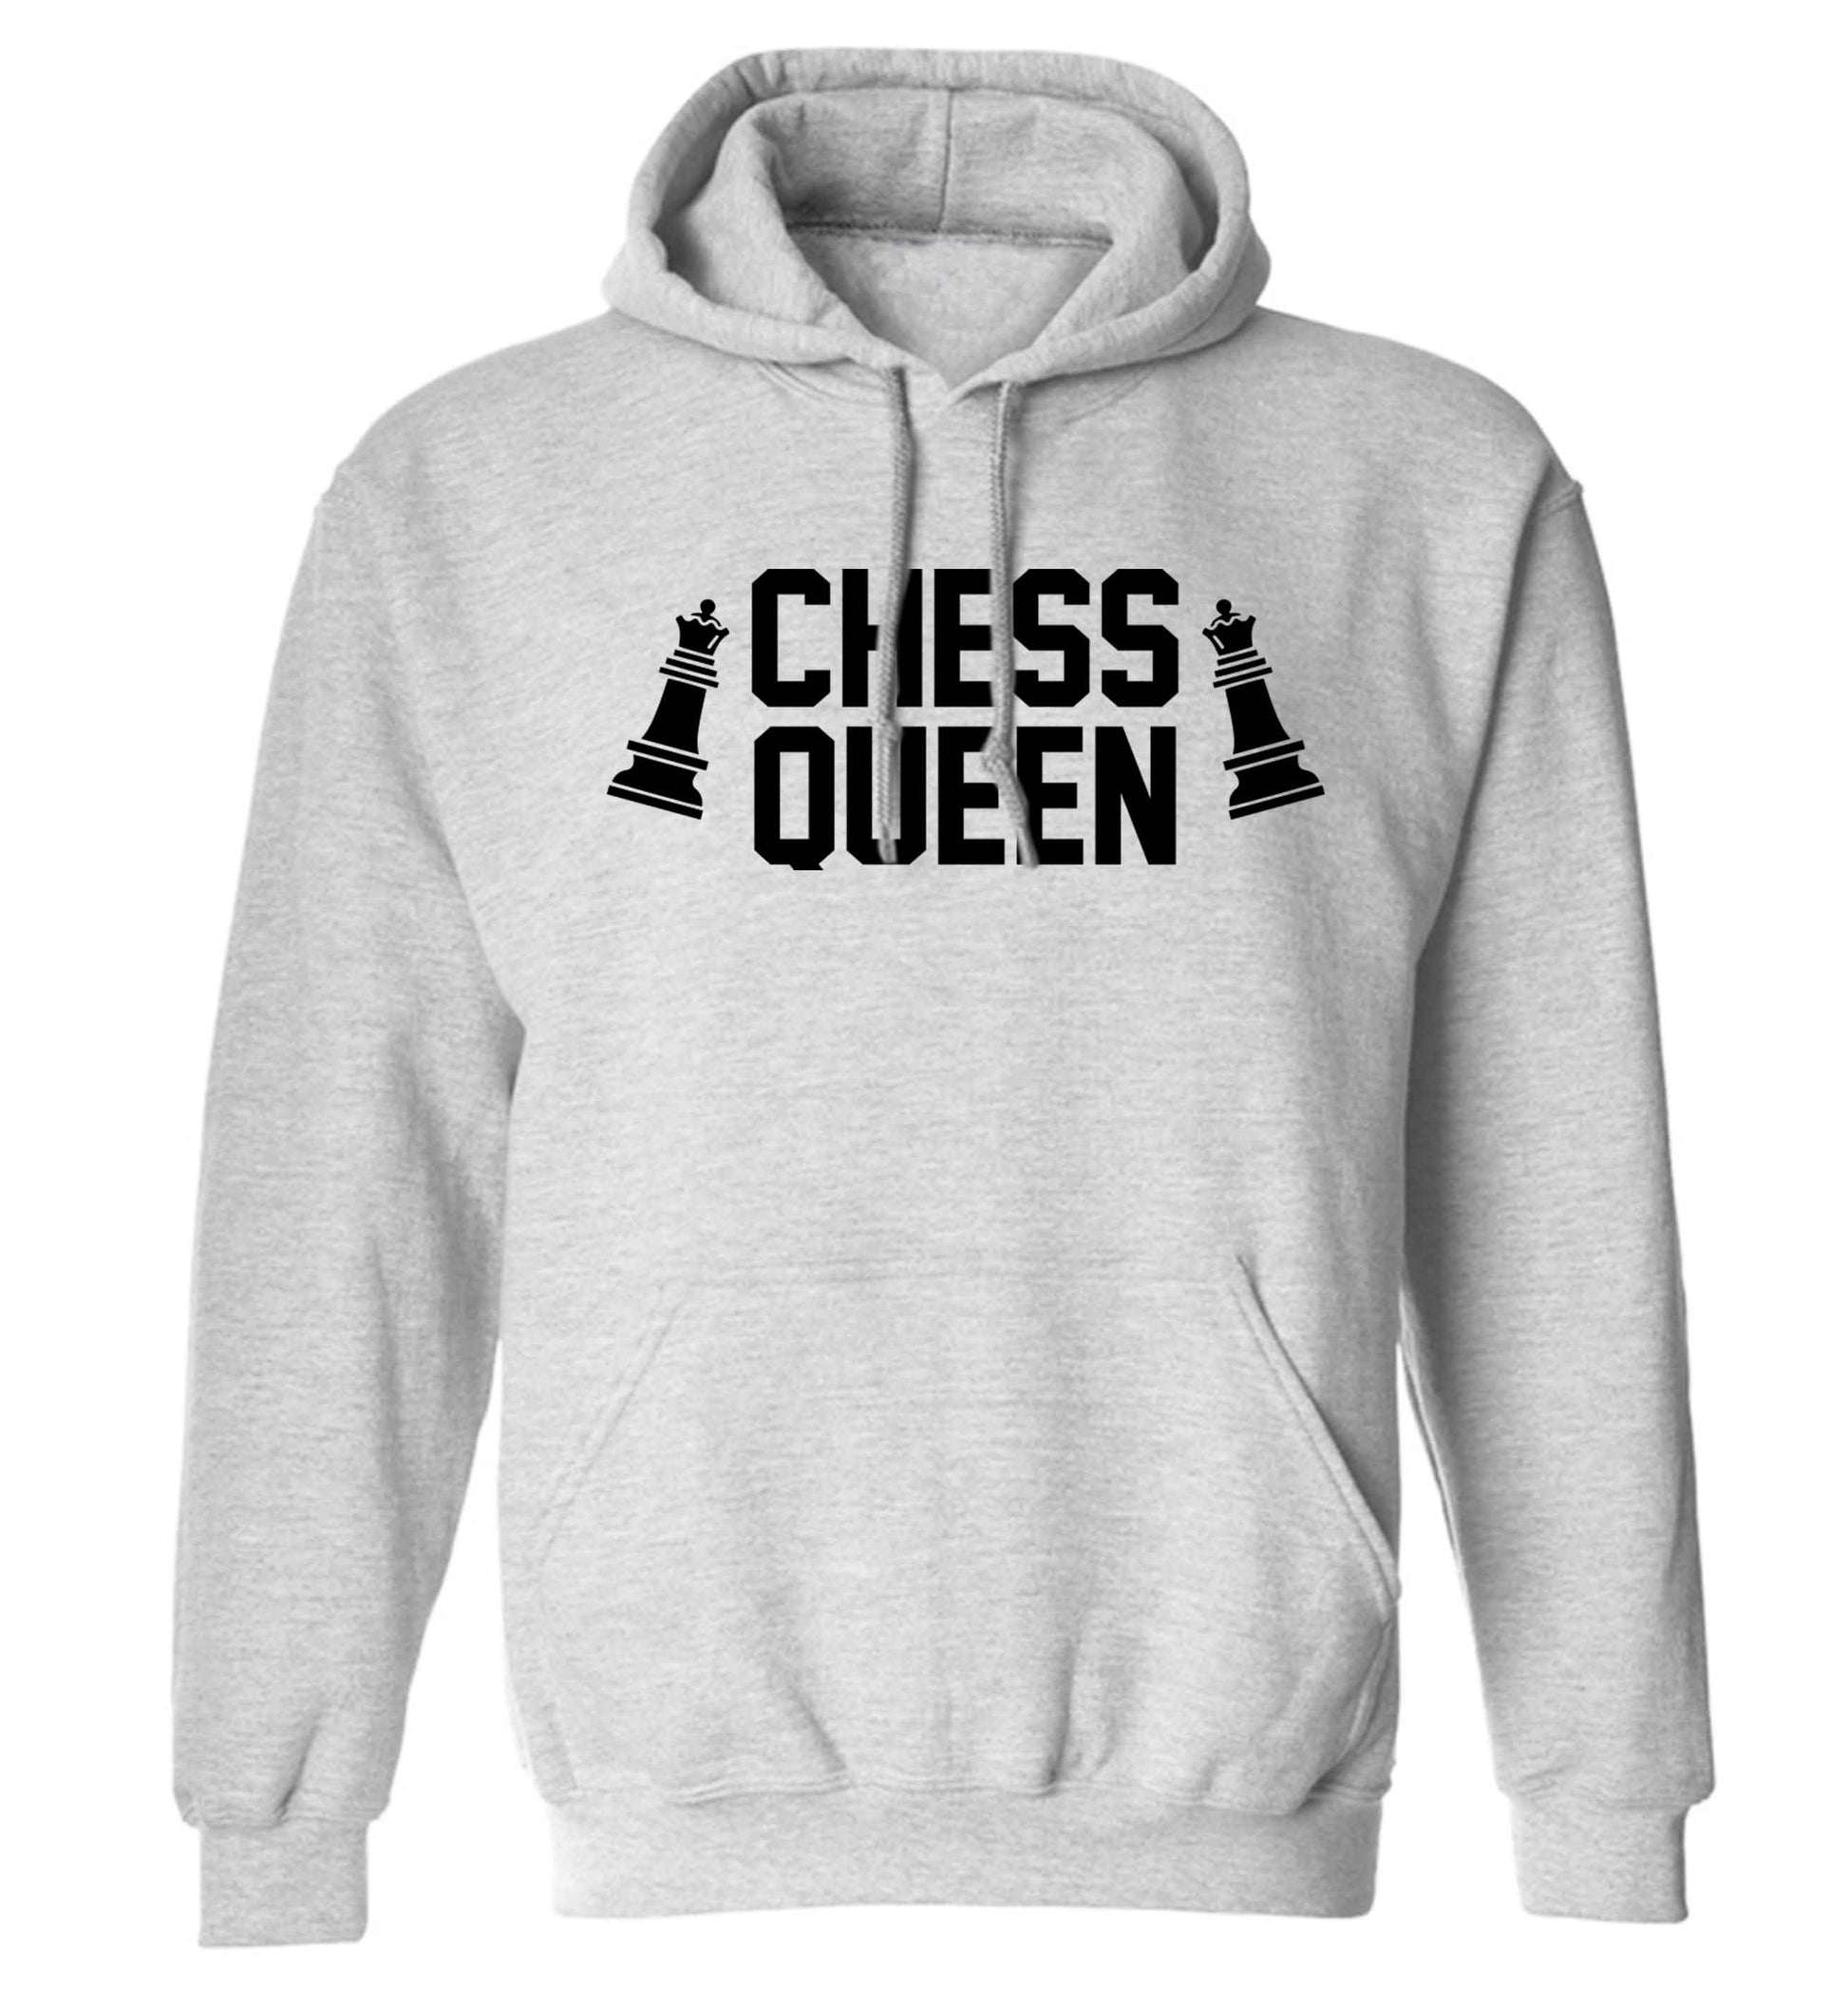 Chess queen adults unisex grey hoodie 2XL